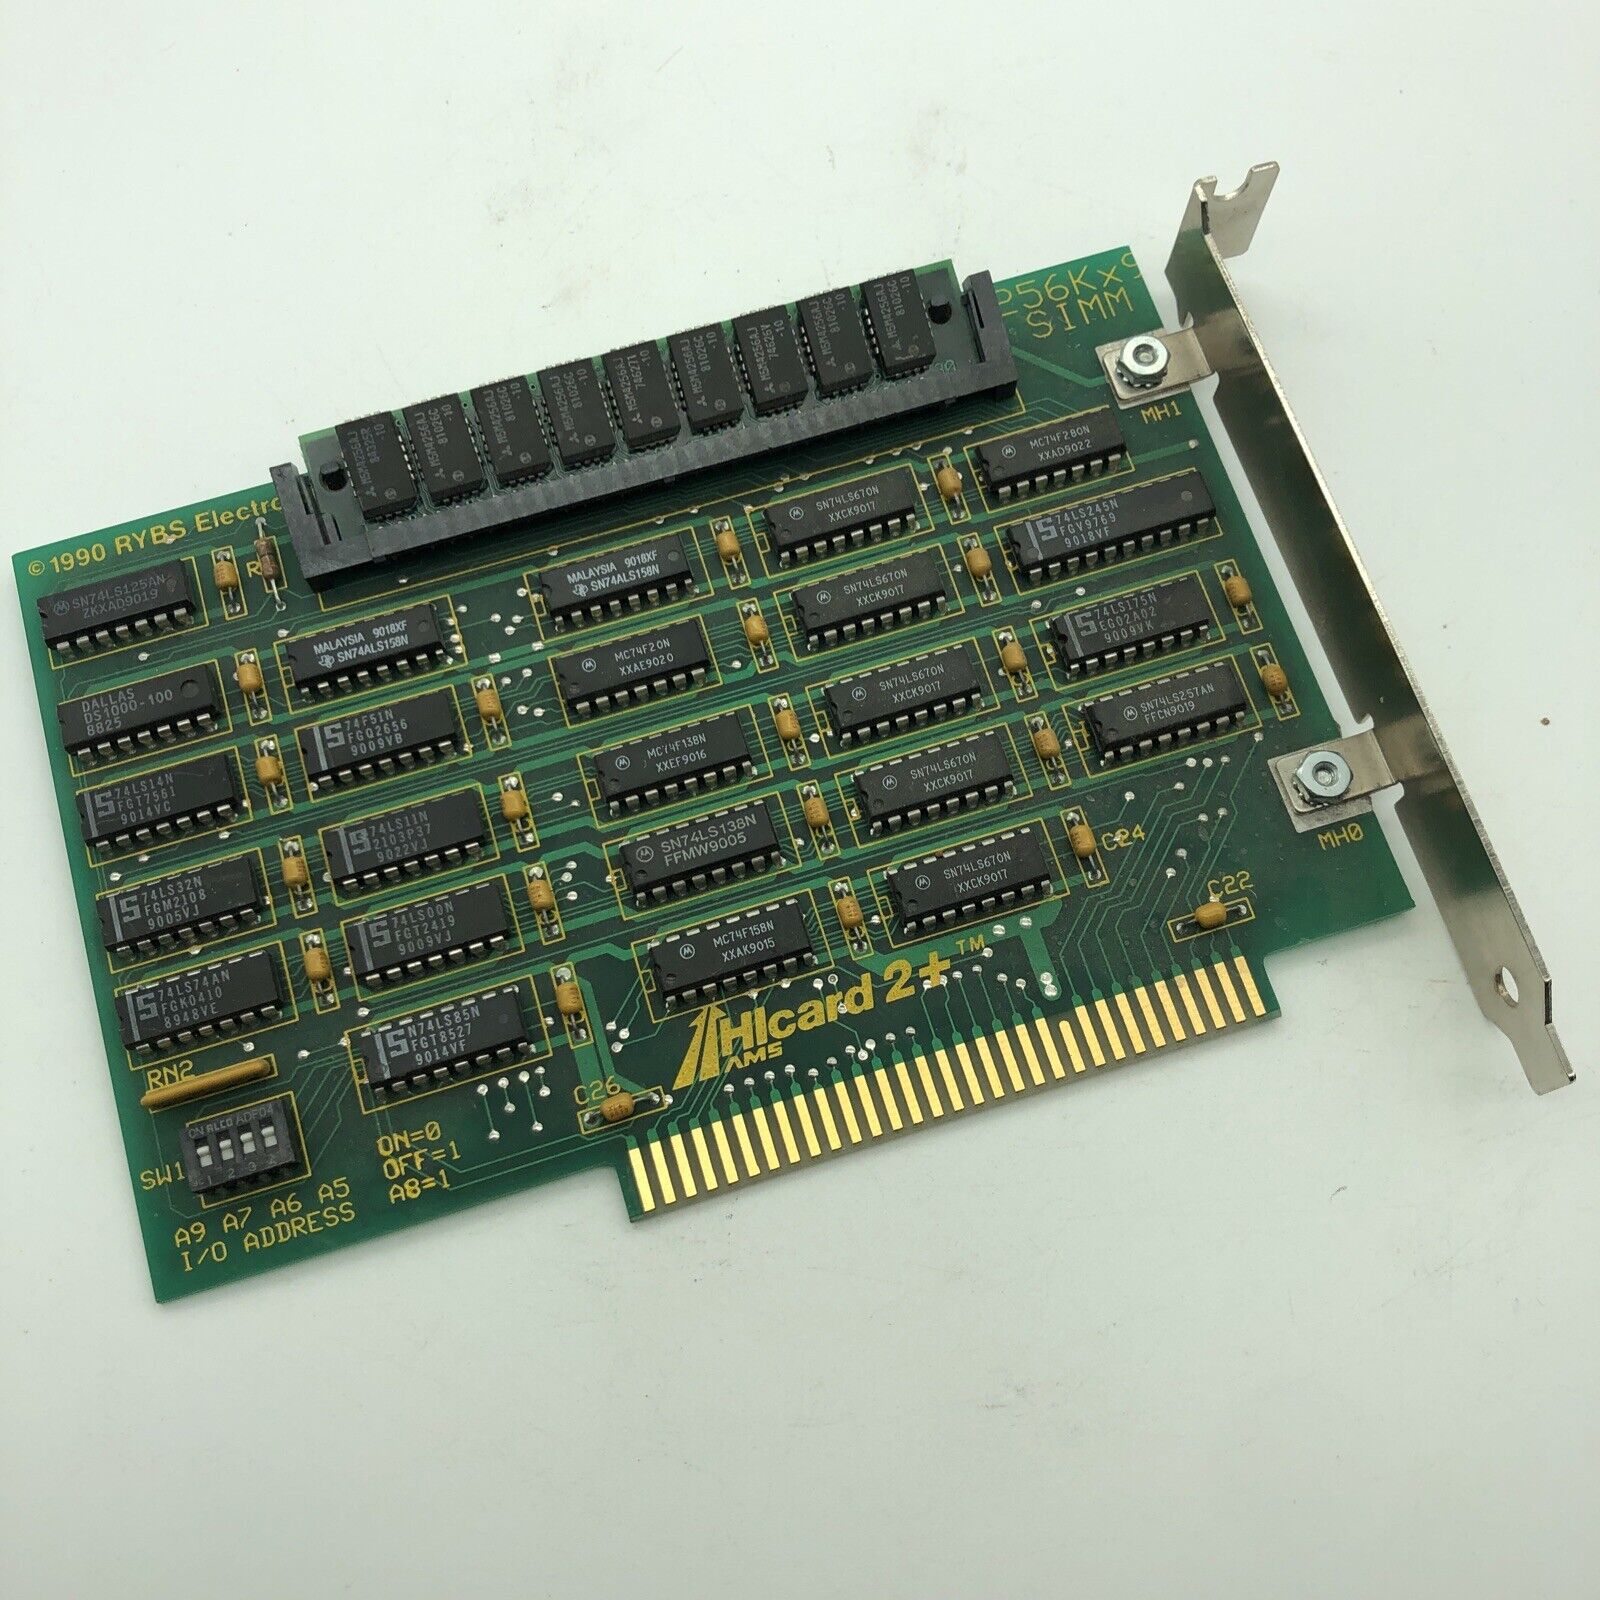 Vintage HiCard 2+ 256K MEMORY EXPANSION Card ISA 8-Bit AMS Module By RYBS w Simm